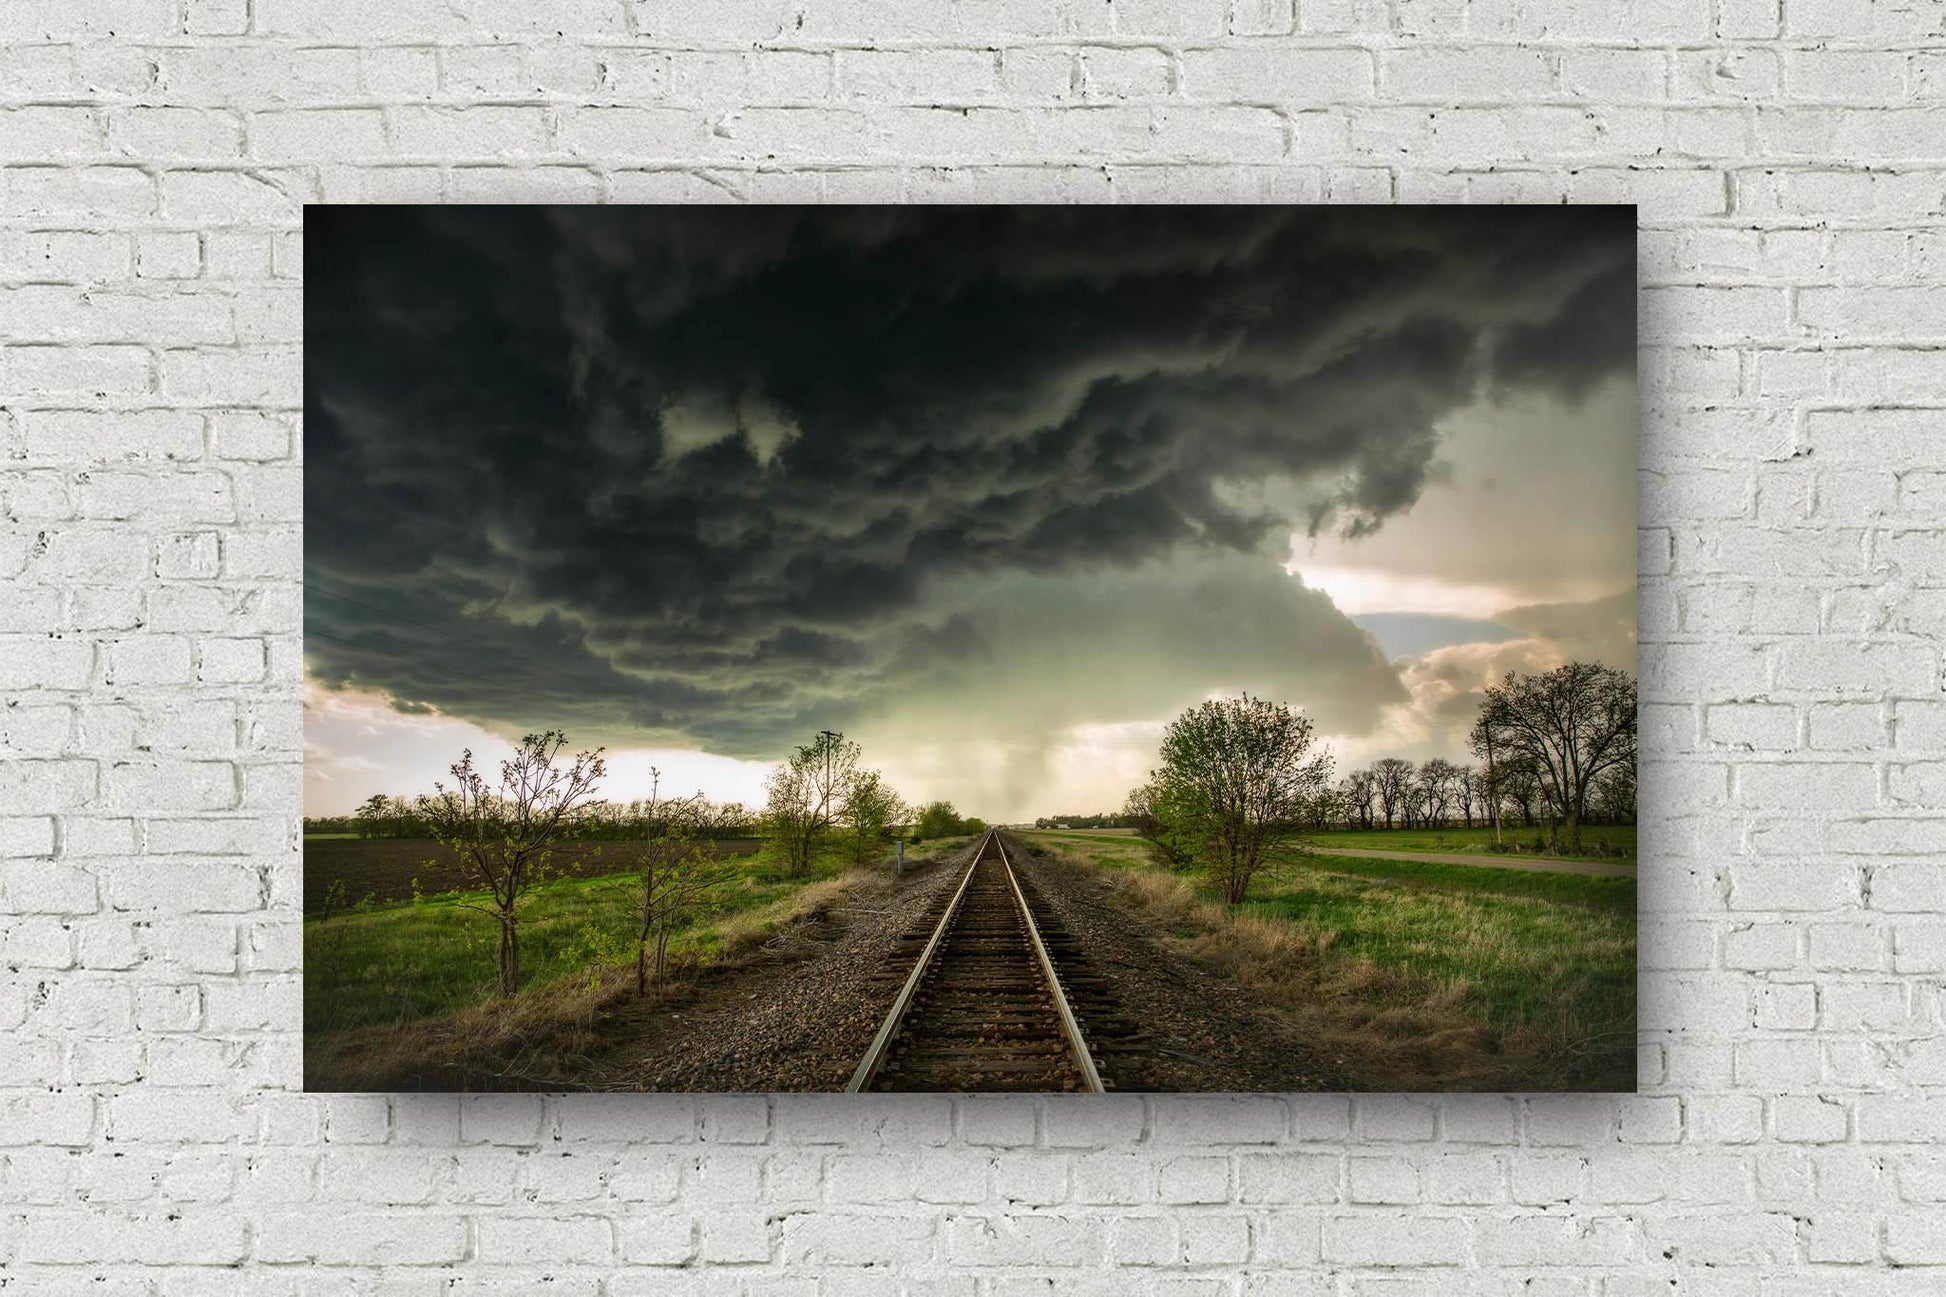 Railroad metal print on aluminum of dark storm clouds over train tracks on a stormy spring day in Kansas by Sean Ramsey of Southern Plains Photography.